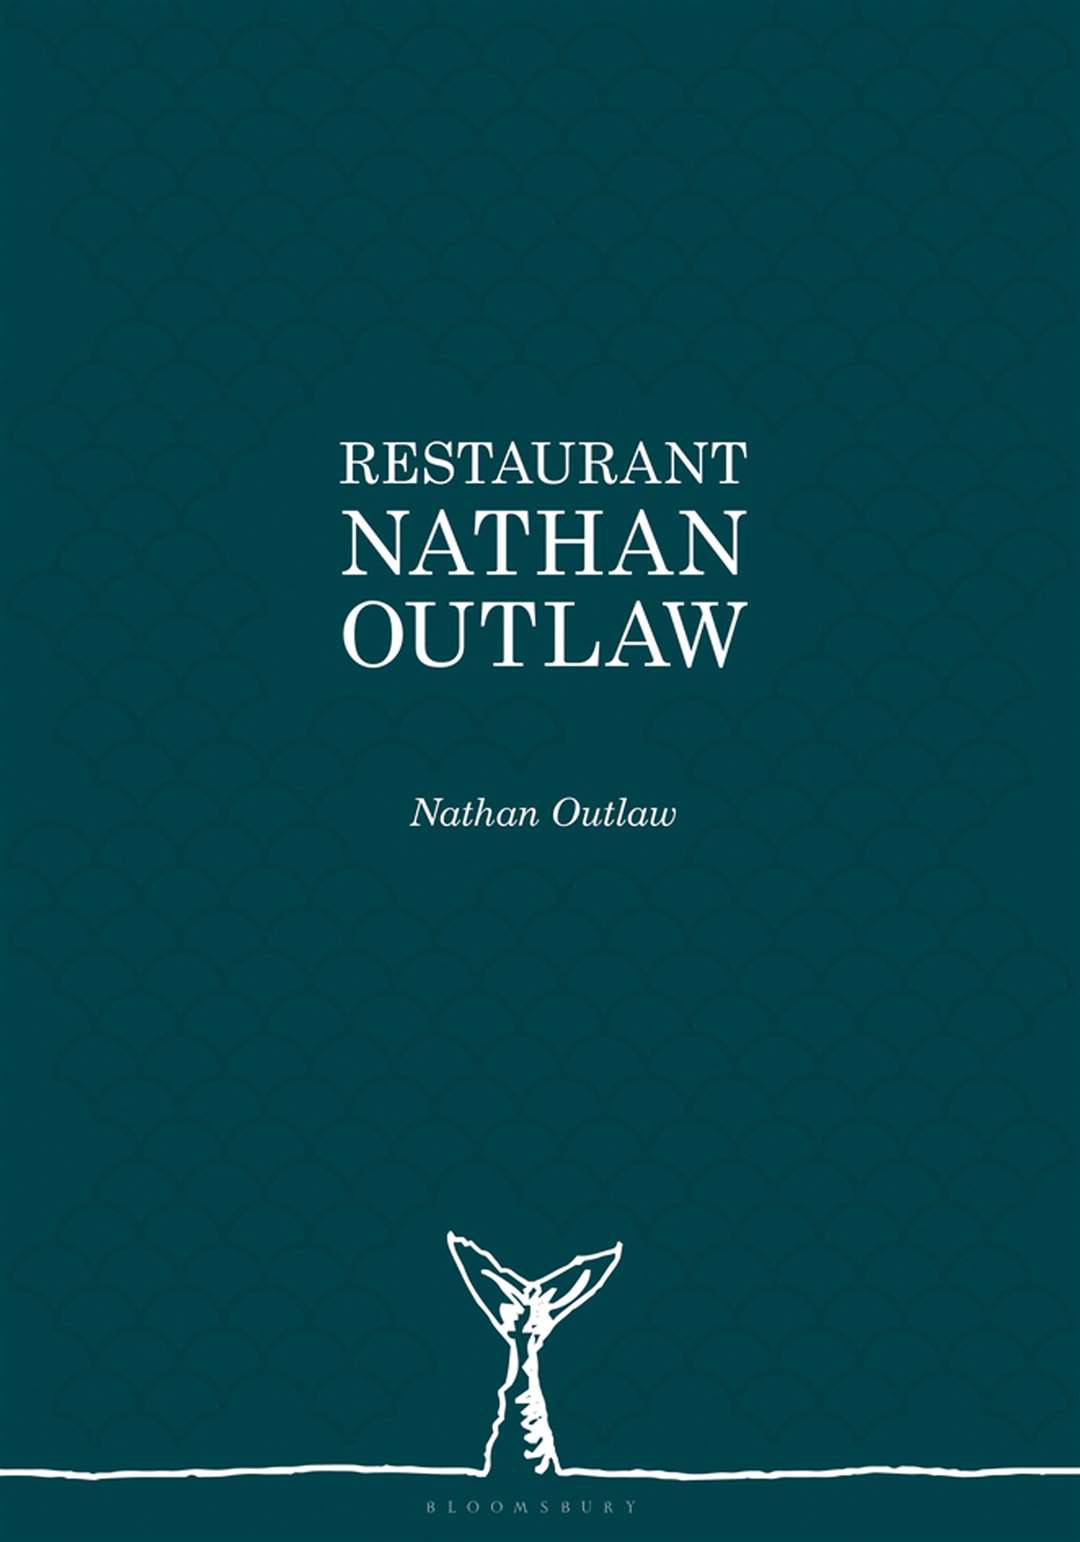 Restaurant Nathan Outlaw by Nathan Outlaw, priced £45. Available now. Picture: PA Photo/David Loftus